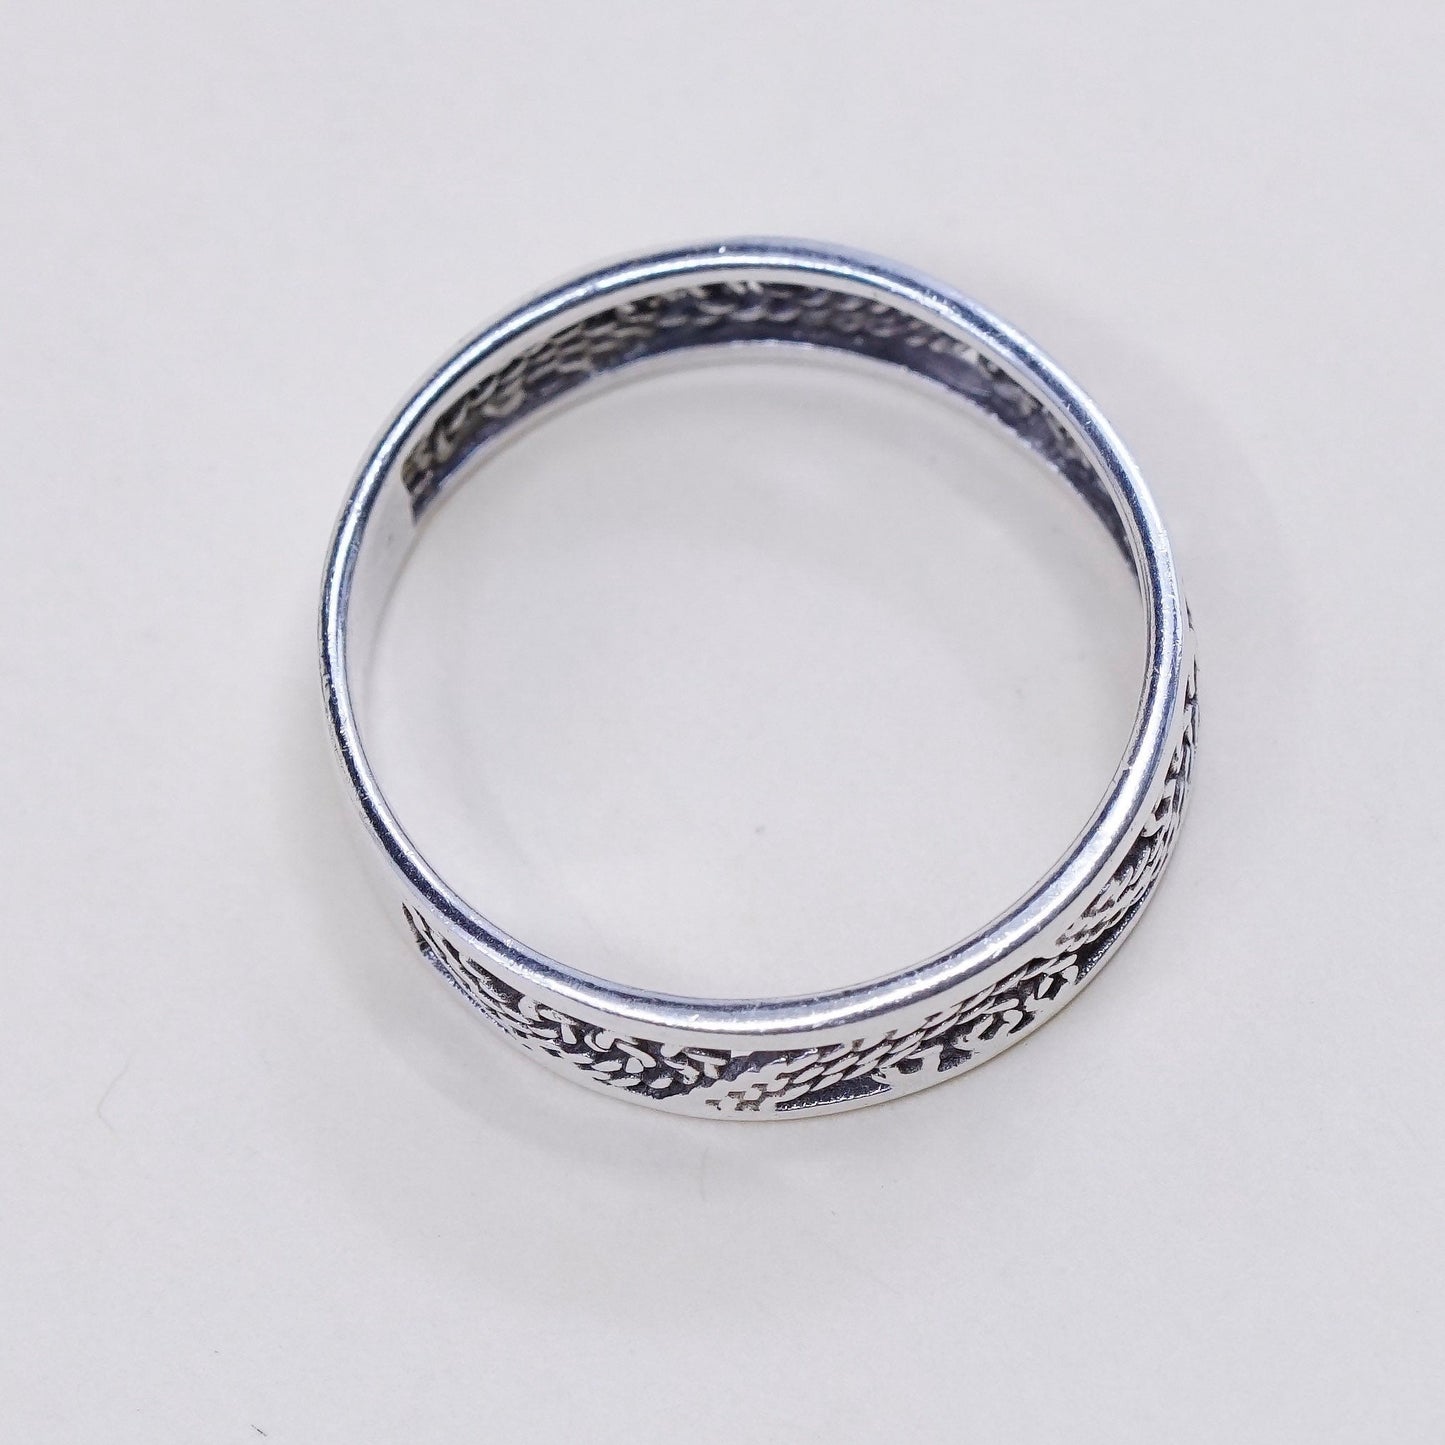 Size 6.75, vintage sterling silver handmade ring, 925 silver band with filigree